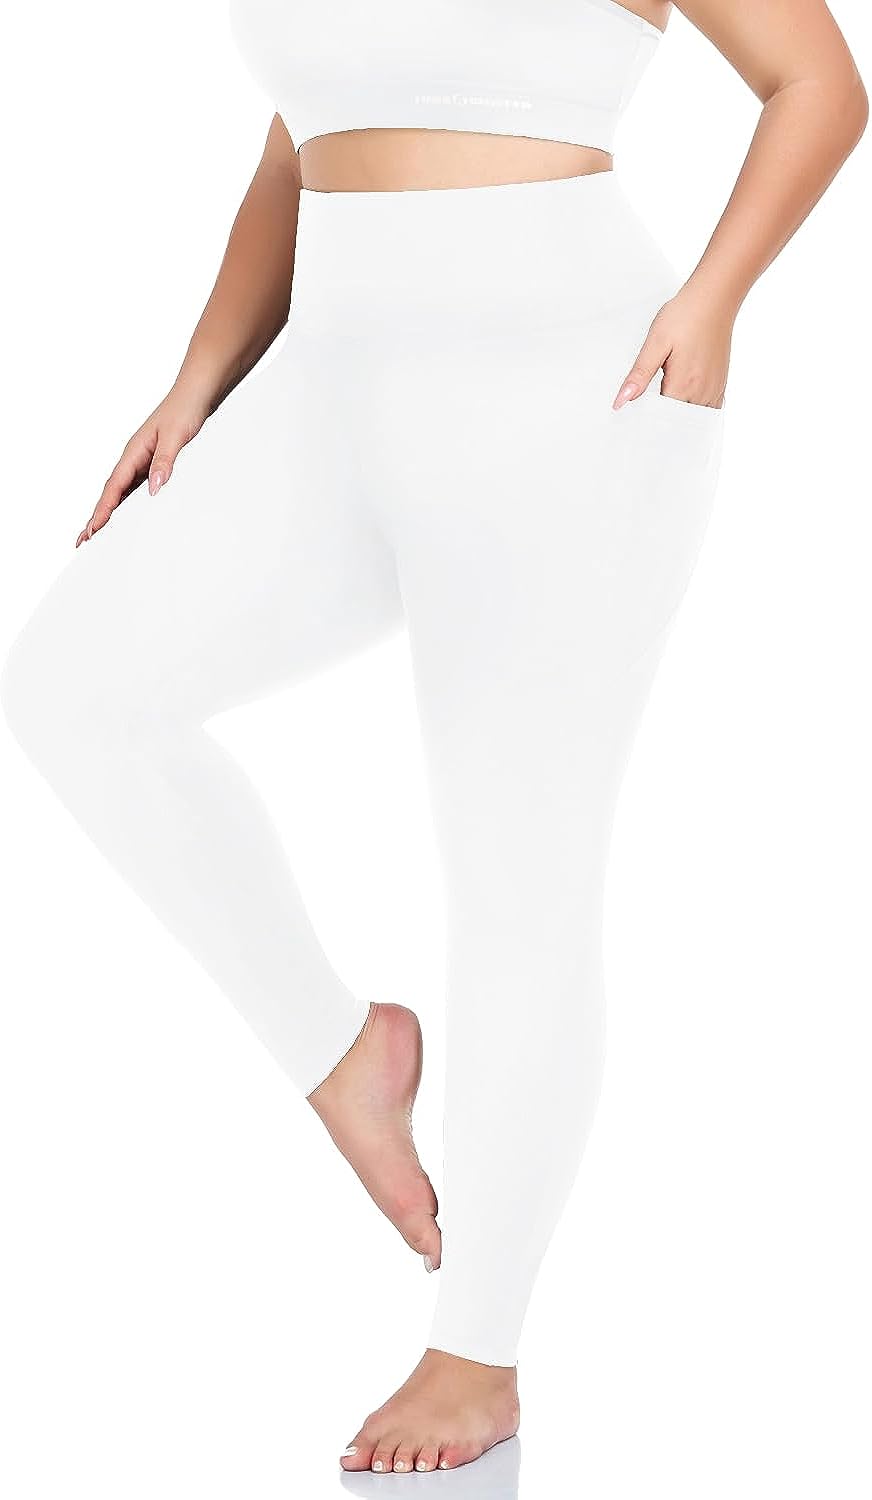 MOREFEEL Plus Size Leggings for Women with Pockets-Stretchy X-4XL